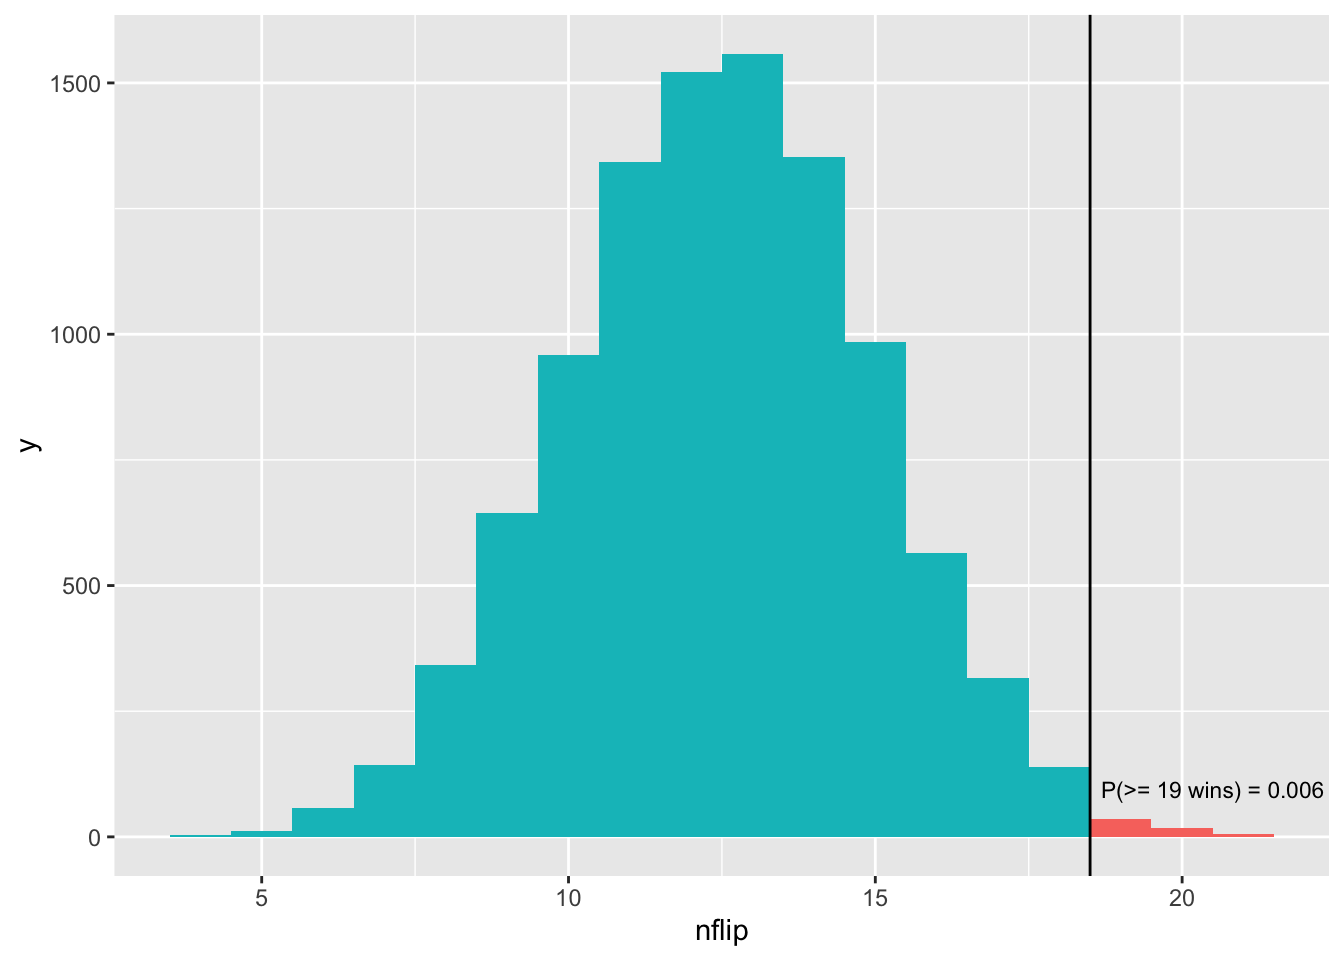 The p-value represents a tail area of the probability distribution for our test statistic, assuming the null hypothesis is true.